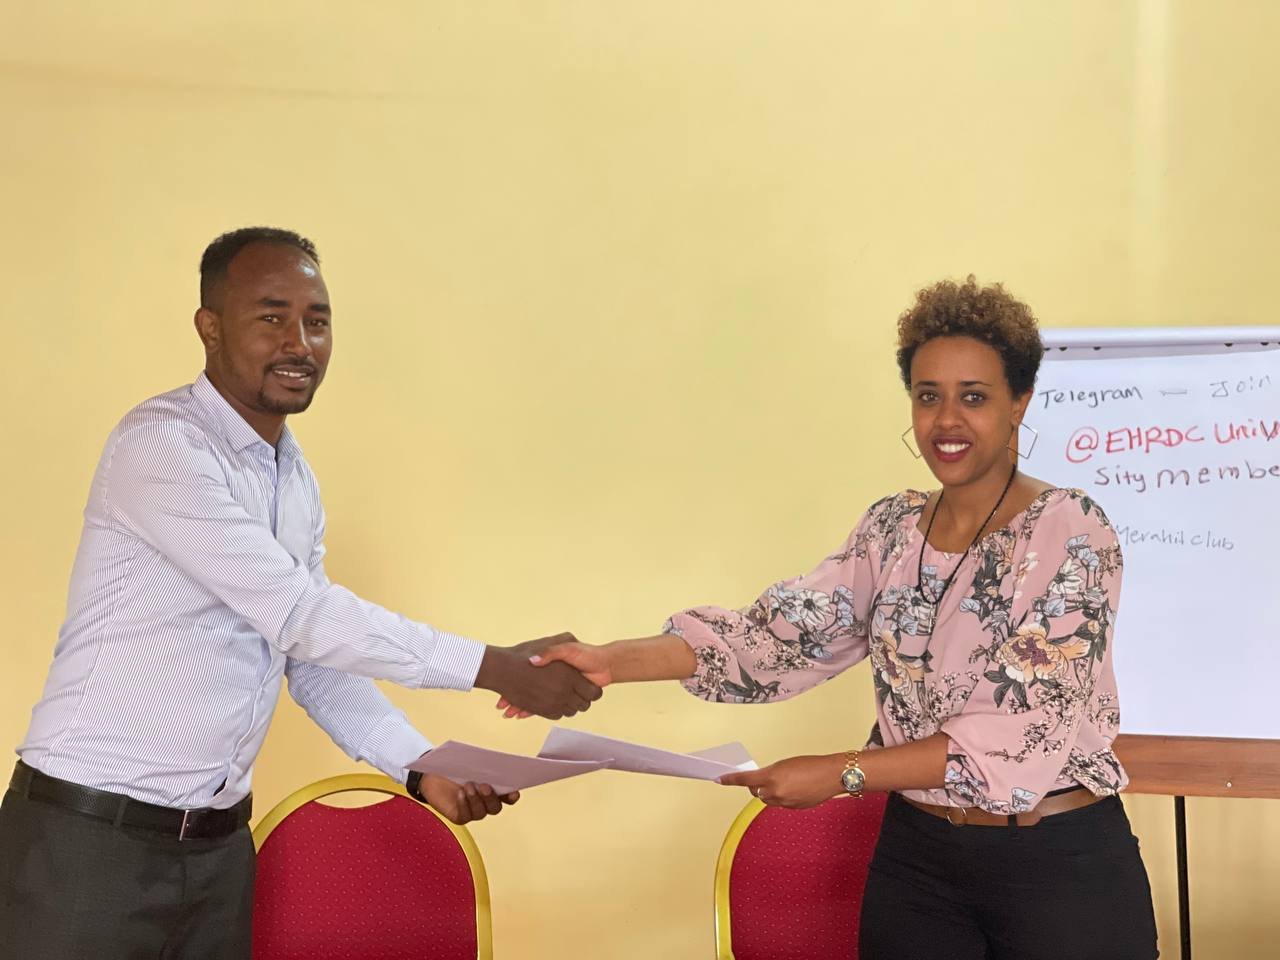 EHRDC Officially signed a Memorandum of Understanding with Jimma University School of Law